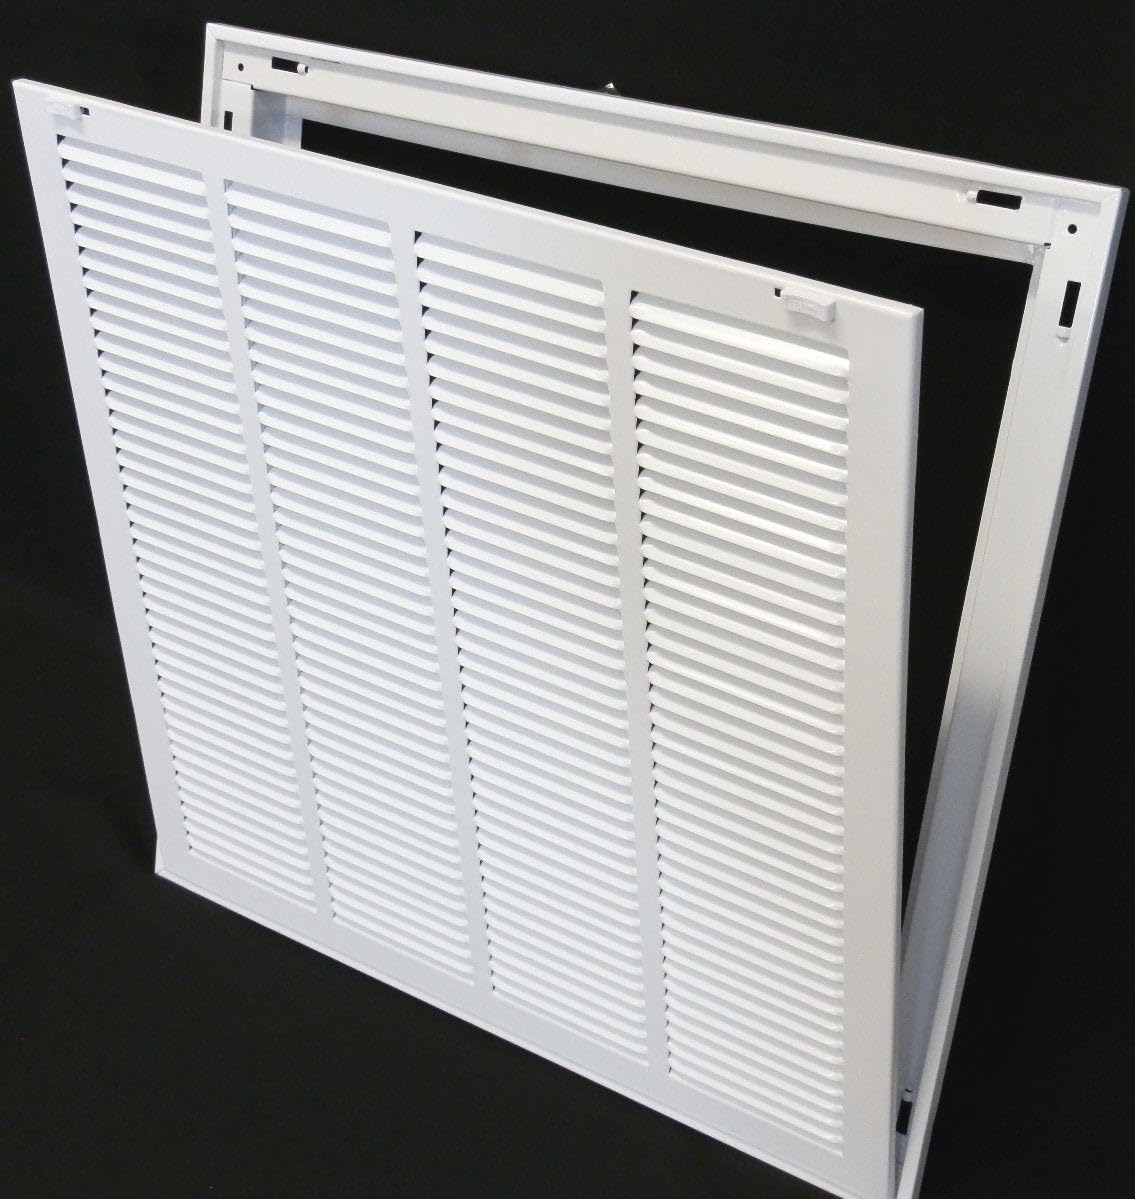 30&quot; X 10&quot; Steel Return Air Filter Grille for 1&quot; Filter - Removable Frame - [Outer Dimensions: 32 5/8&quot; X 12 5/8&quot;]